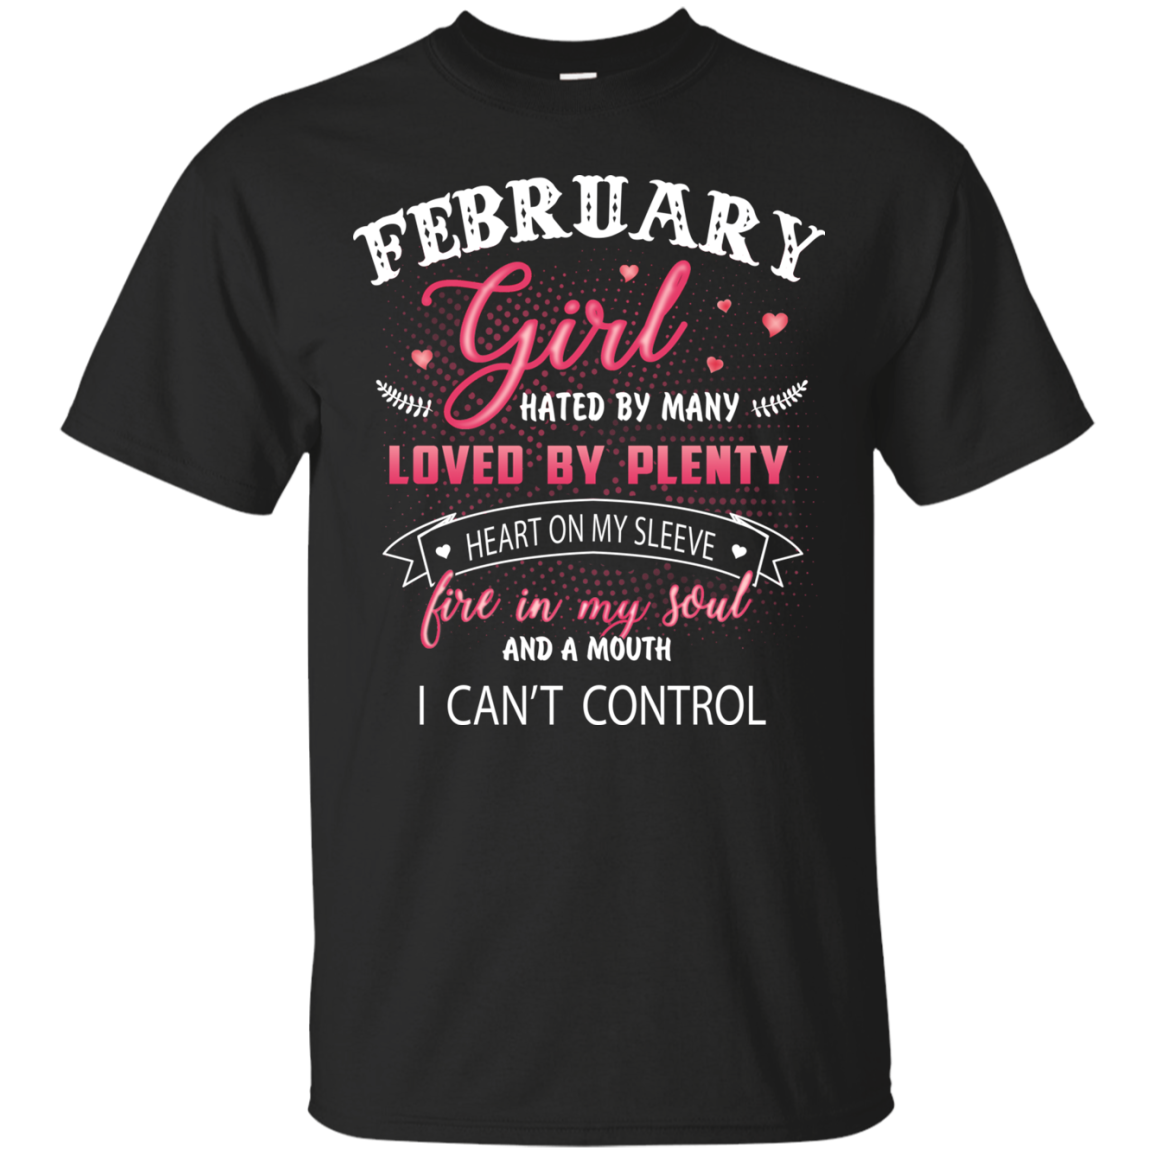 February Girl Hated By Many Loved By Plenty Heart On Her Sleeve Fire In ...